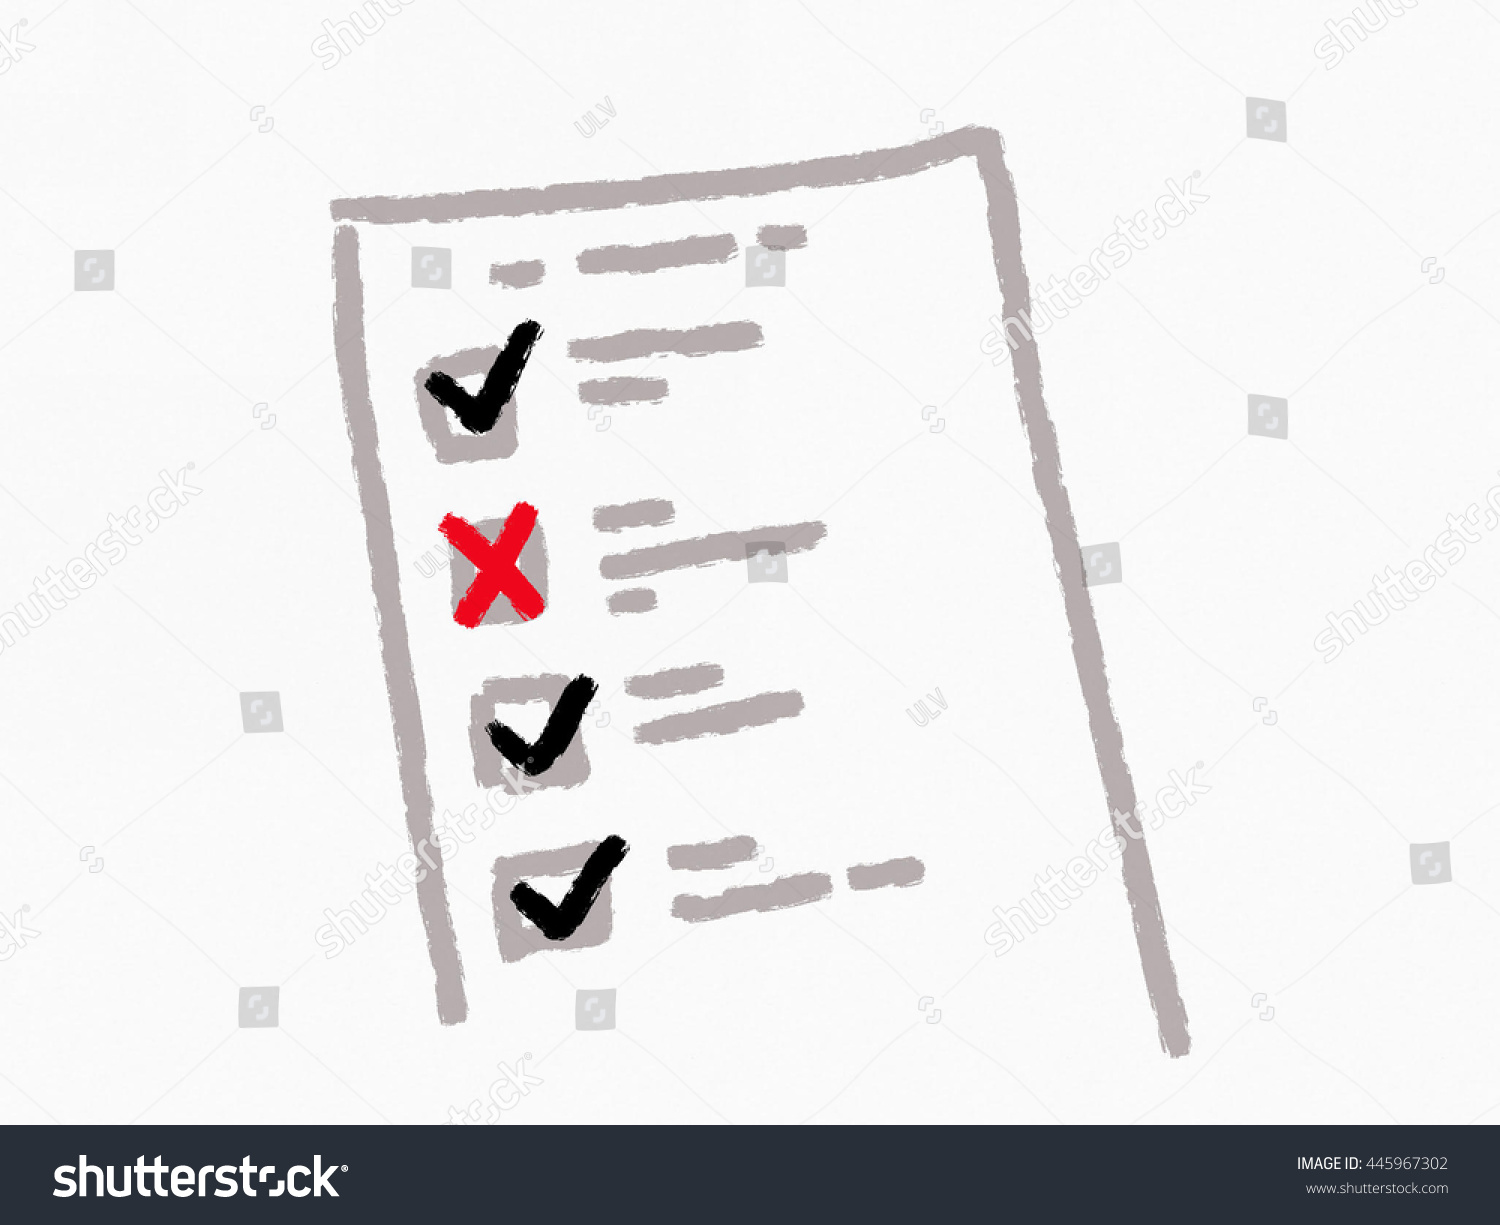 stock-photo-hand-drawn-risk-assessment-form-survey-quiz-exam-or-questionnaire-tick-off-black-and-red-cross-for-445967302.jpg